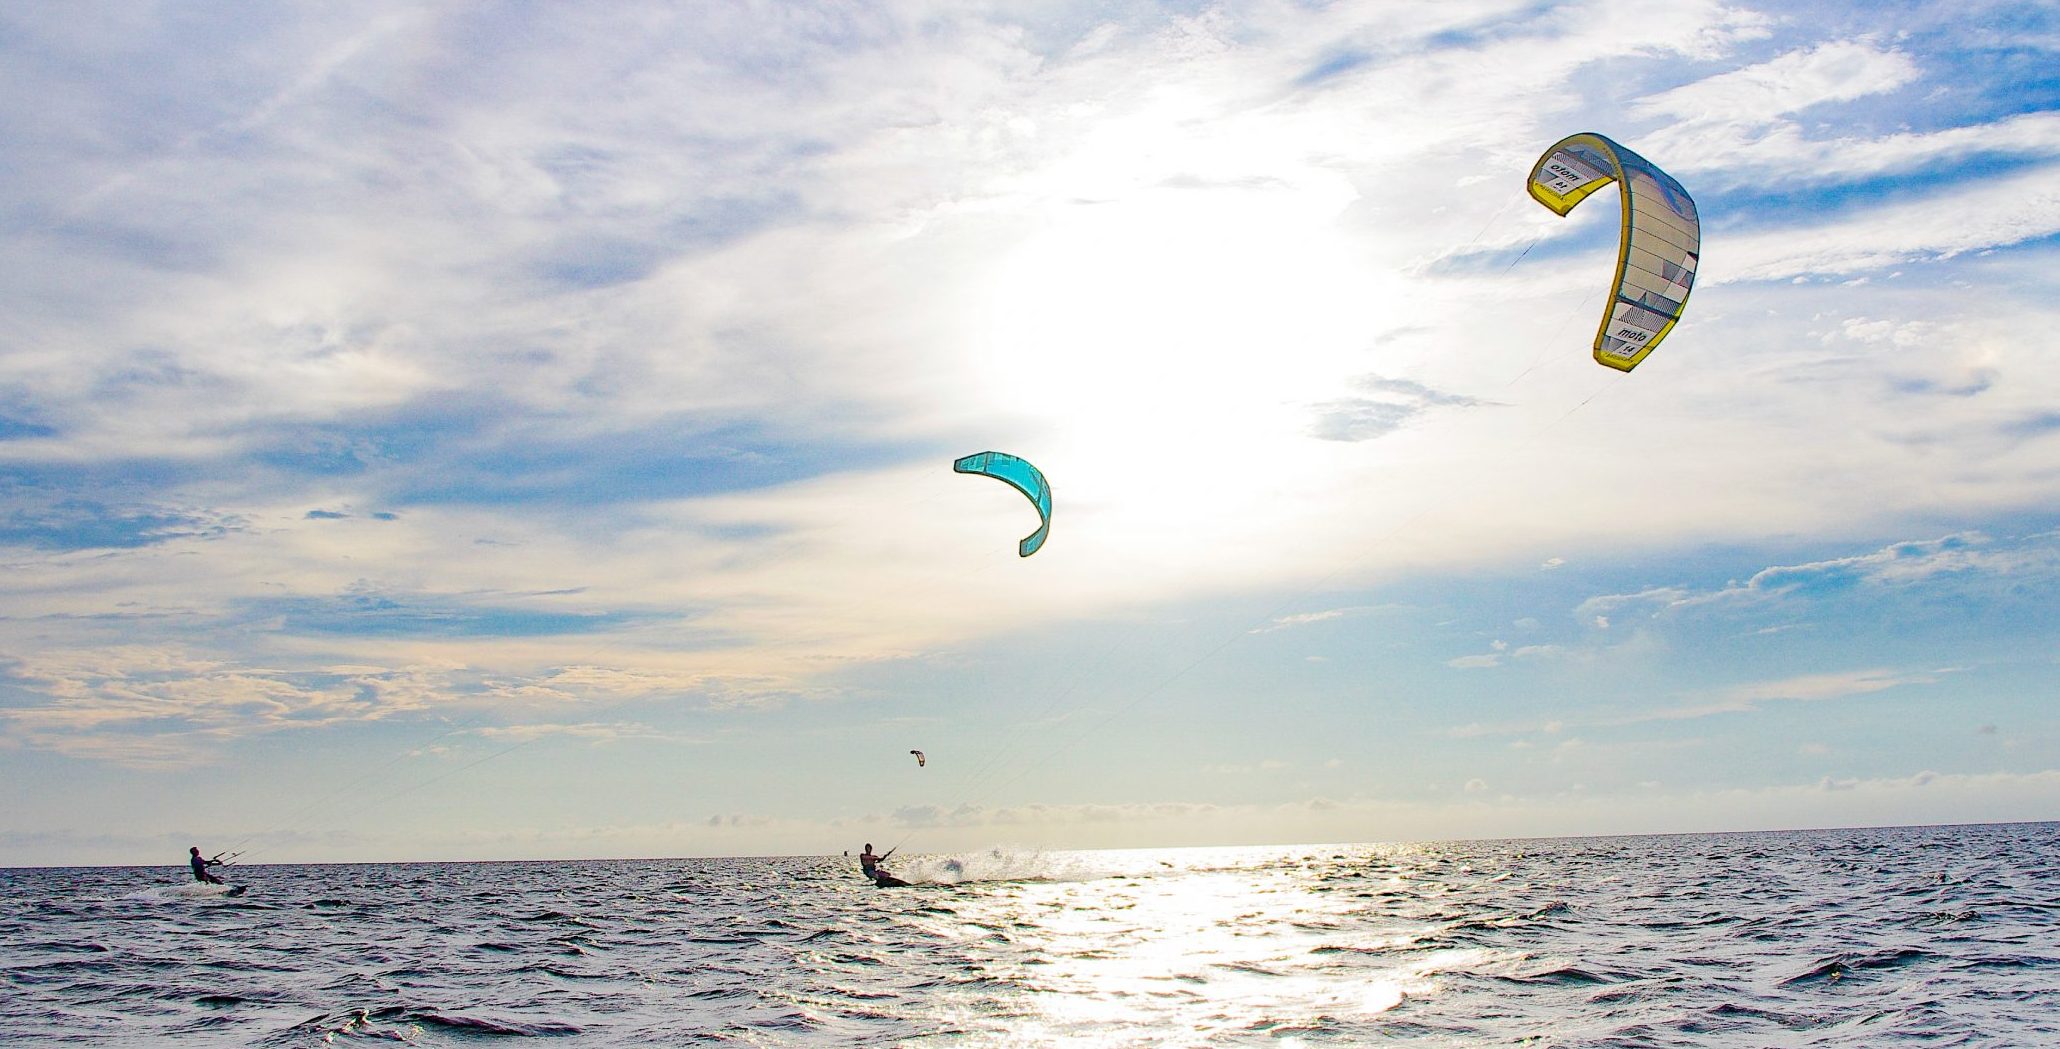 Outer Banks kiteboarders in Rodanthe, NC